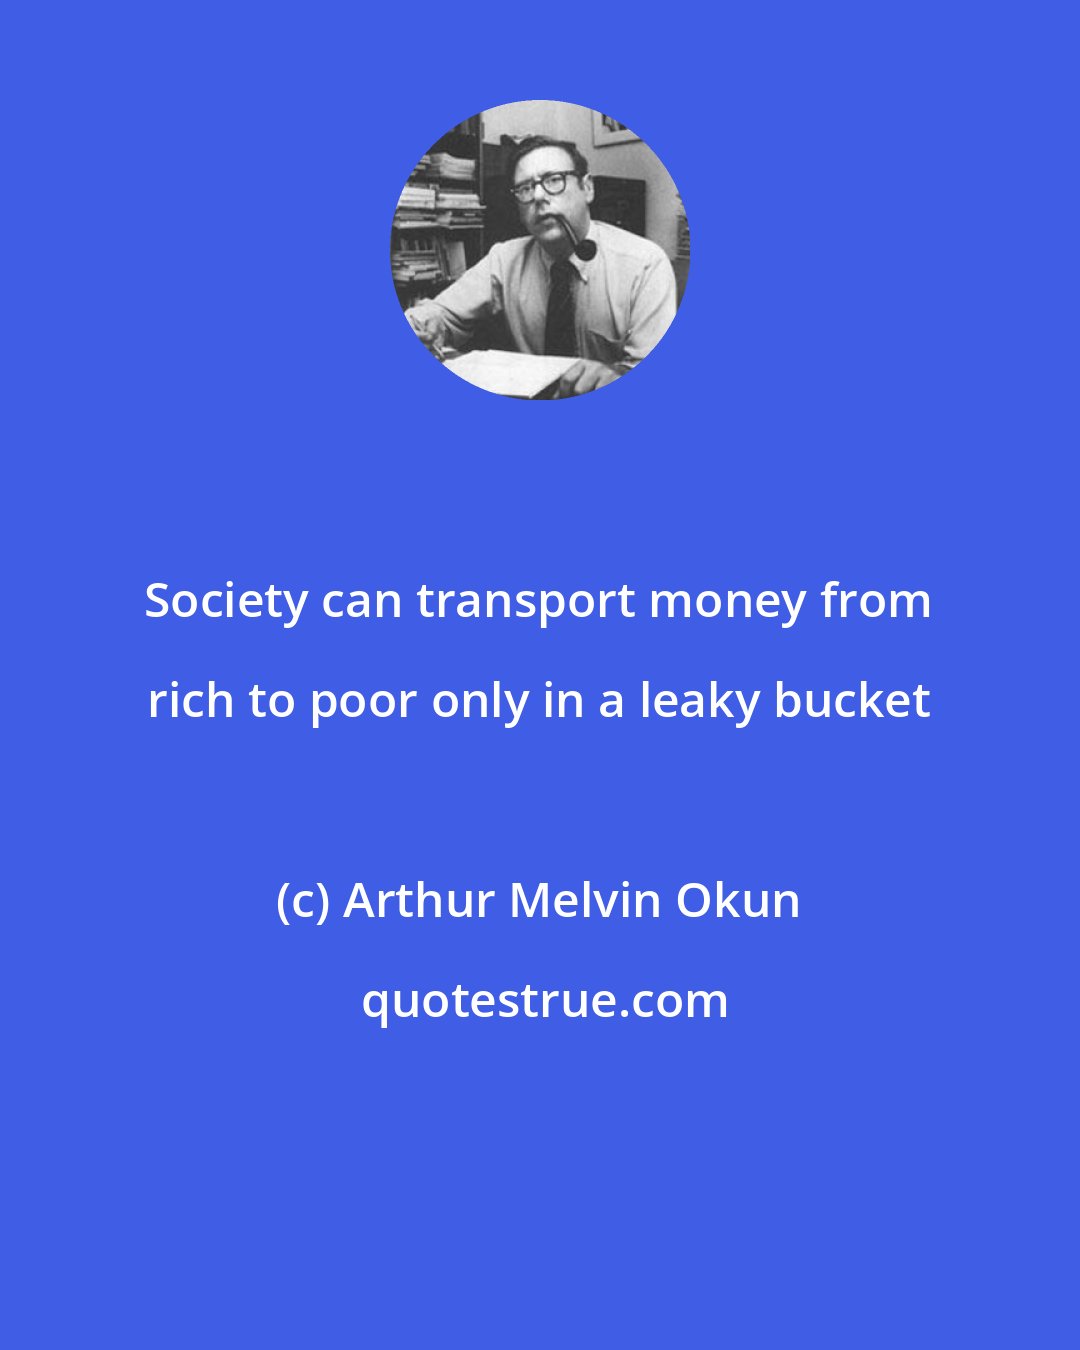 Arthur Melvin Okun: Society can transport money from rich to poor only in a leaky bucket